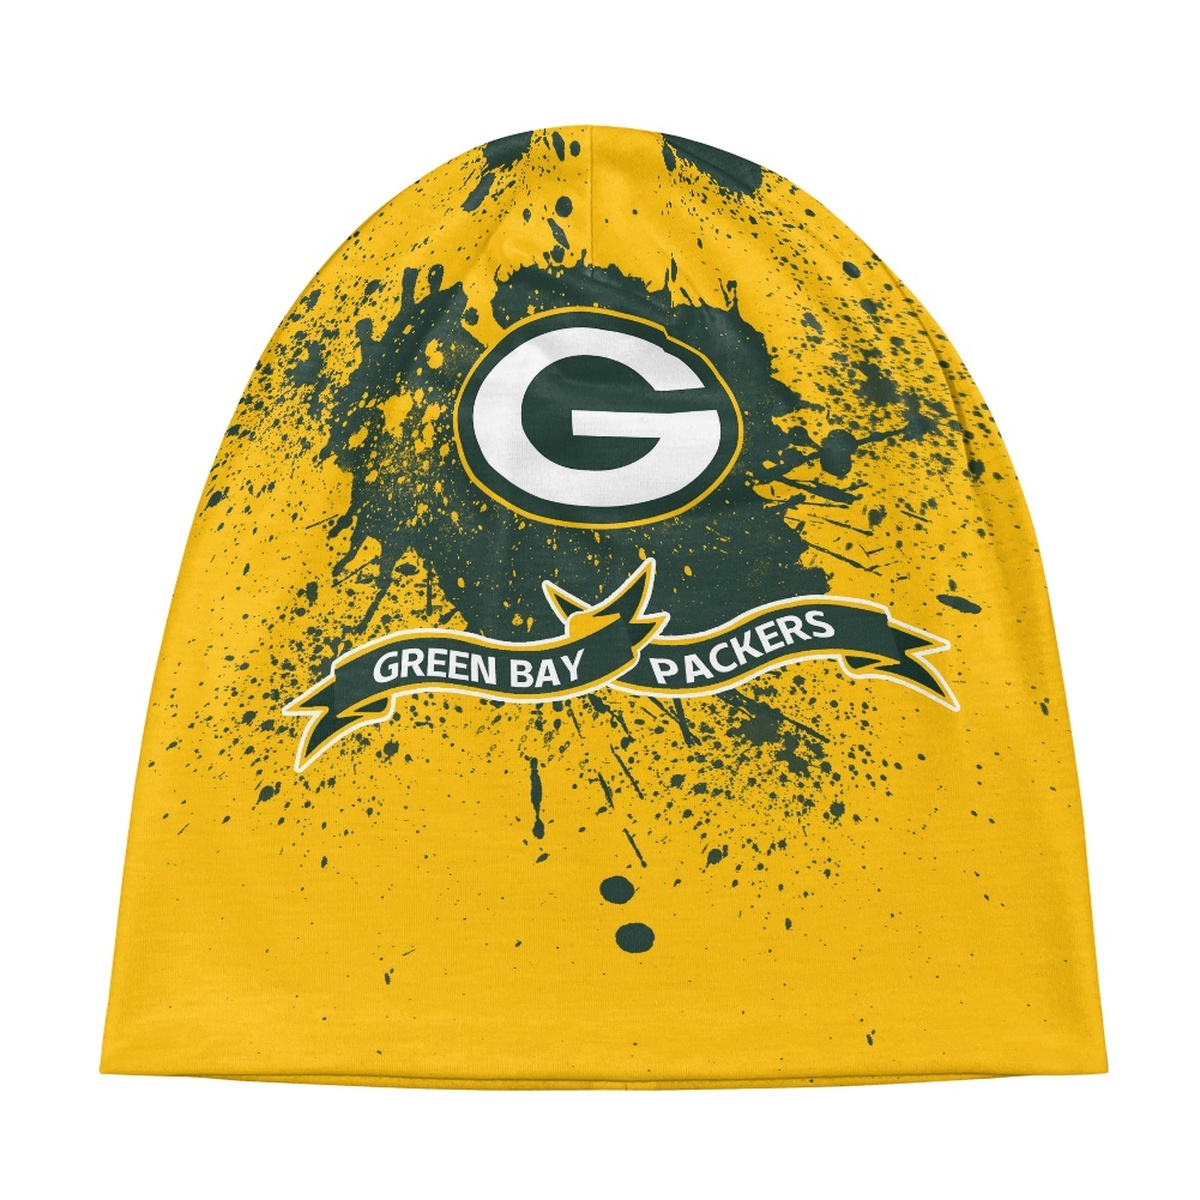 Green Bay Packers Baggy Skull Hats 0141